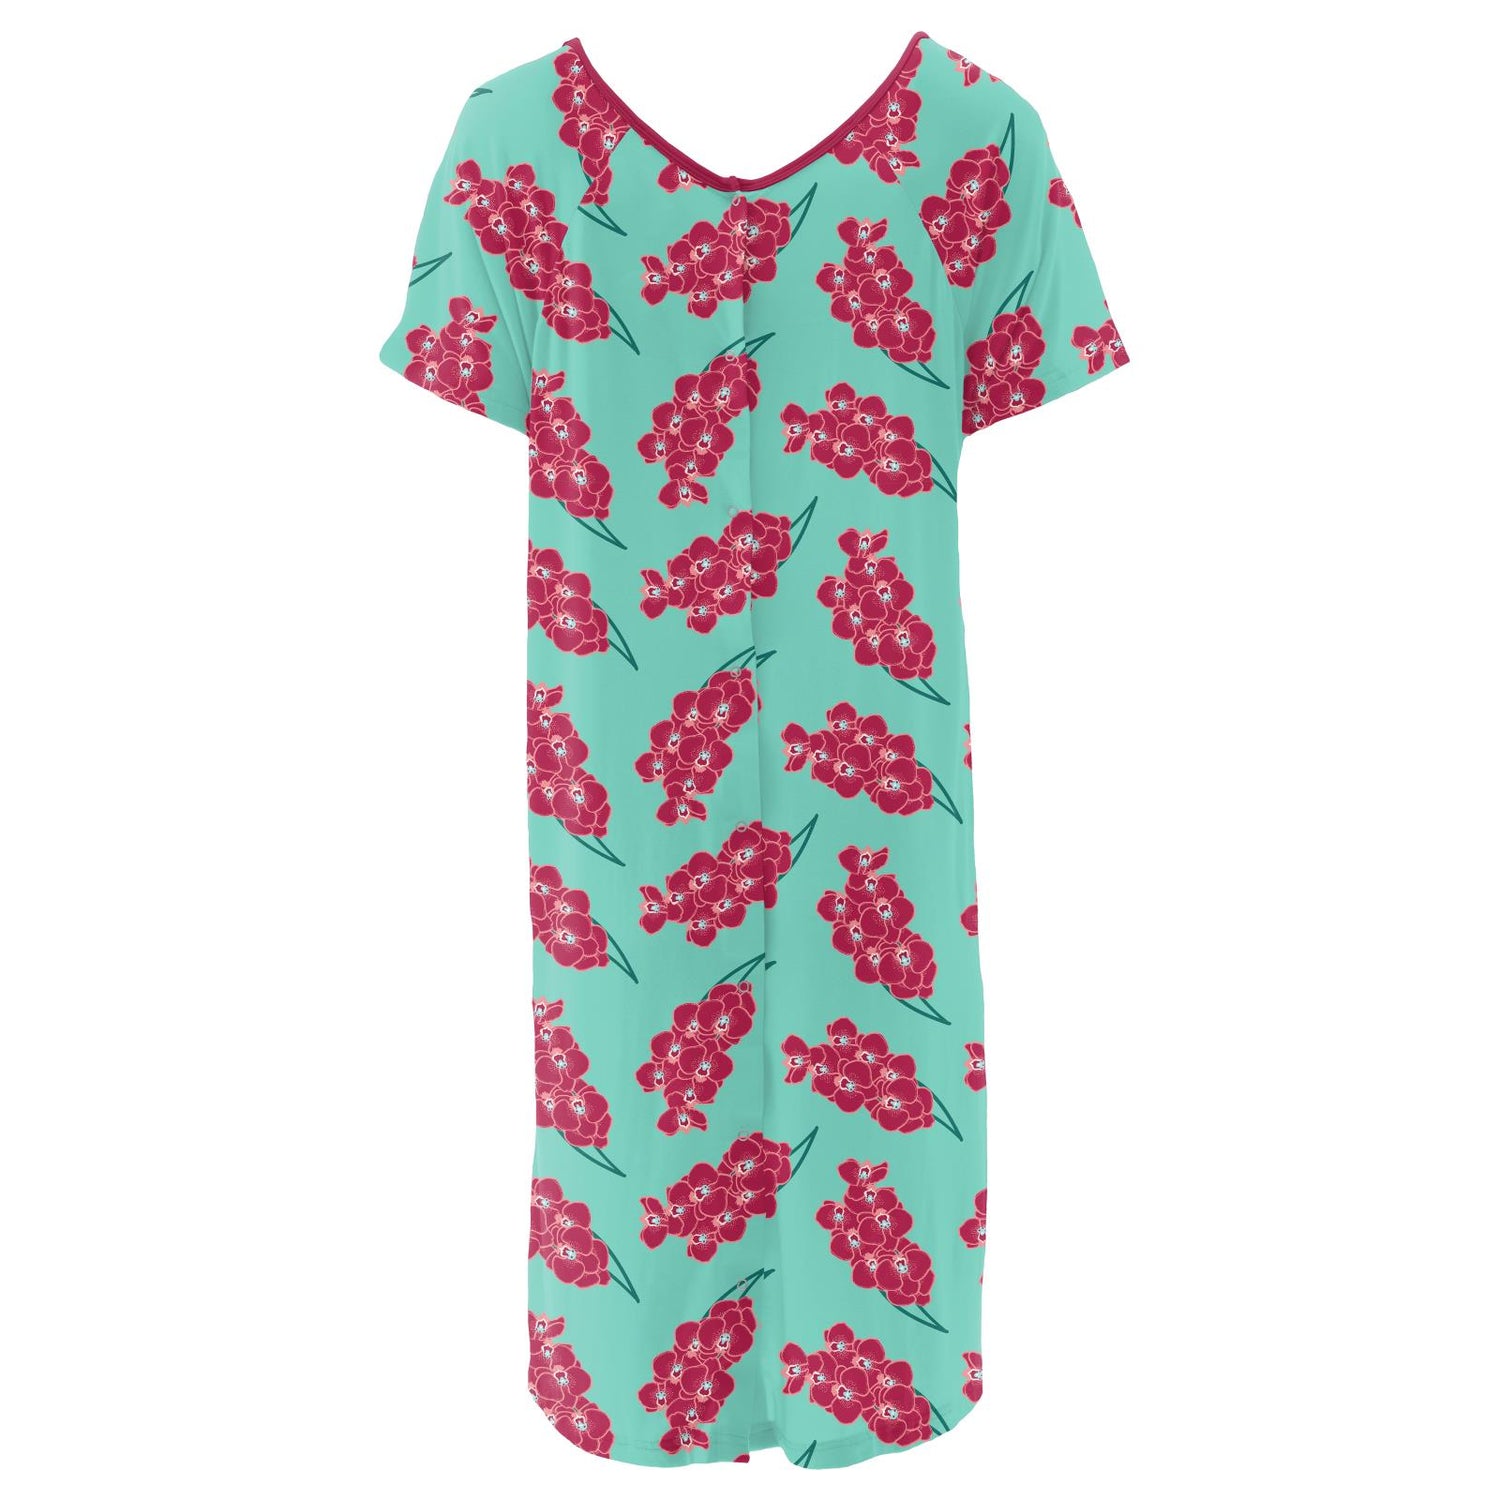 Women's Print Hospital Gown in Glass Orchids